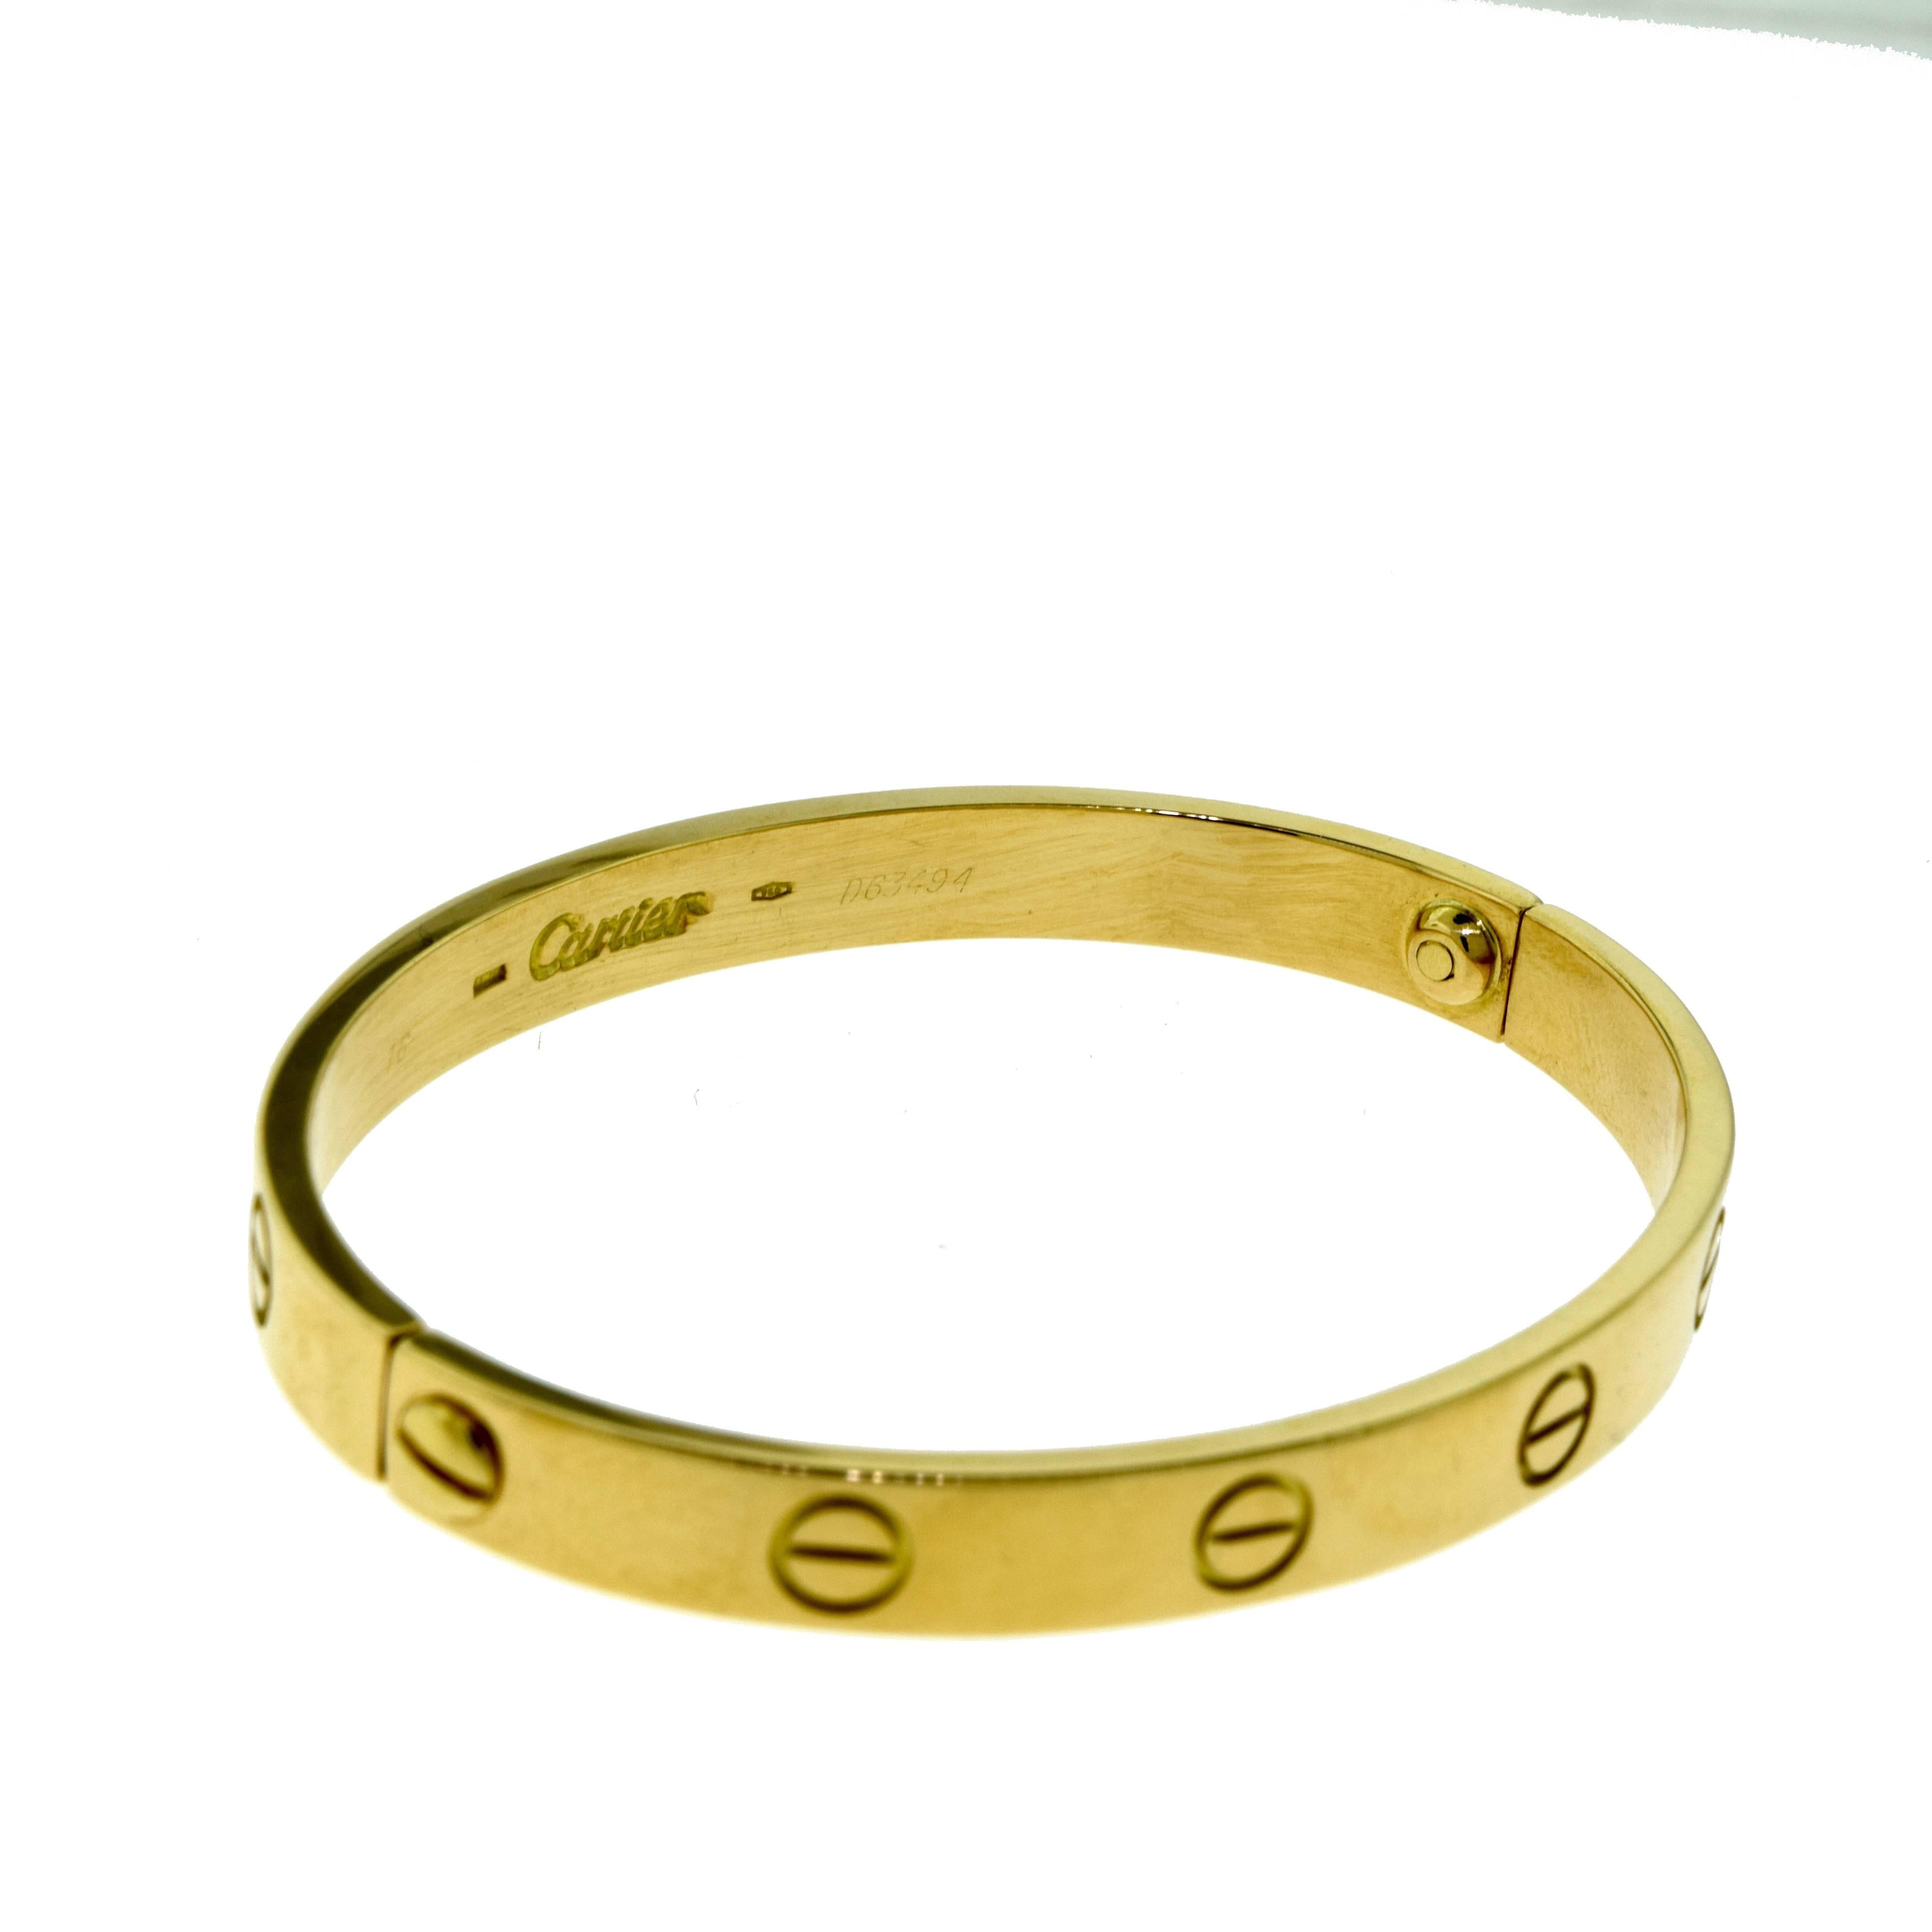 From Cartier's Iconic LOVE Collection:
Size: 16 = 16 cm

Metal: 18 Karat Yellow Gold
Total Item Weight (g): 28.1
Screw System: Old Screw
Hallmark: Cartier 16 Serial Number

Comes with Certificate of Authenticity, Box, and Screwdriver 